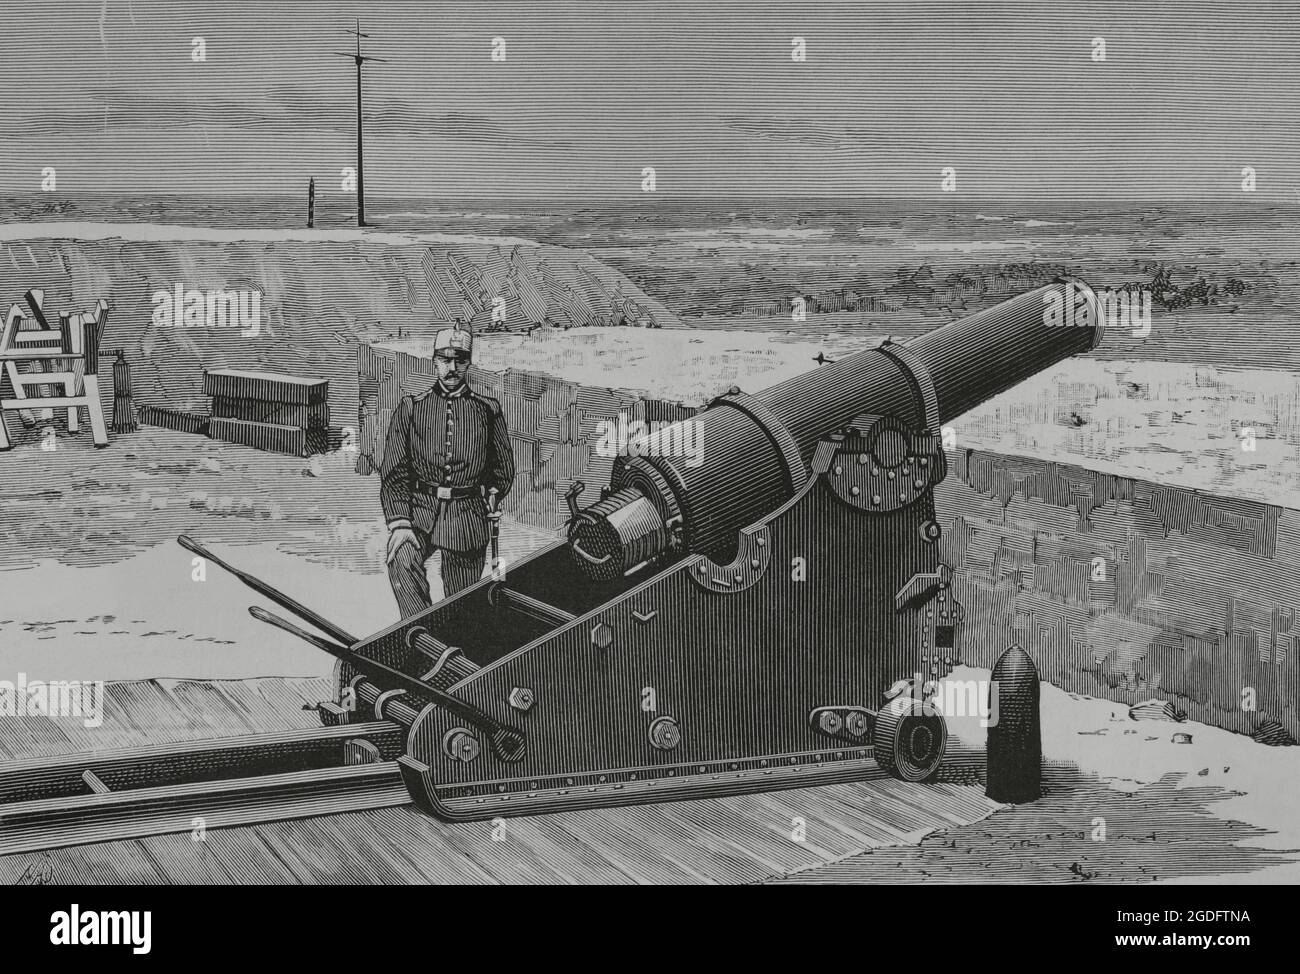 Spain. The new 'Plasencia Cannons'. Experimental howitzer-mortar nr. 1. Testing at the Torregorda camp (Cádiz) during the months of June to September 1882. Calibre 21 cm. Withstood 602 shots in tests. Drawing by Nao. Engraving. La llustración Española y Americana, 1882. Stock Photo